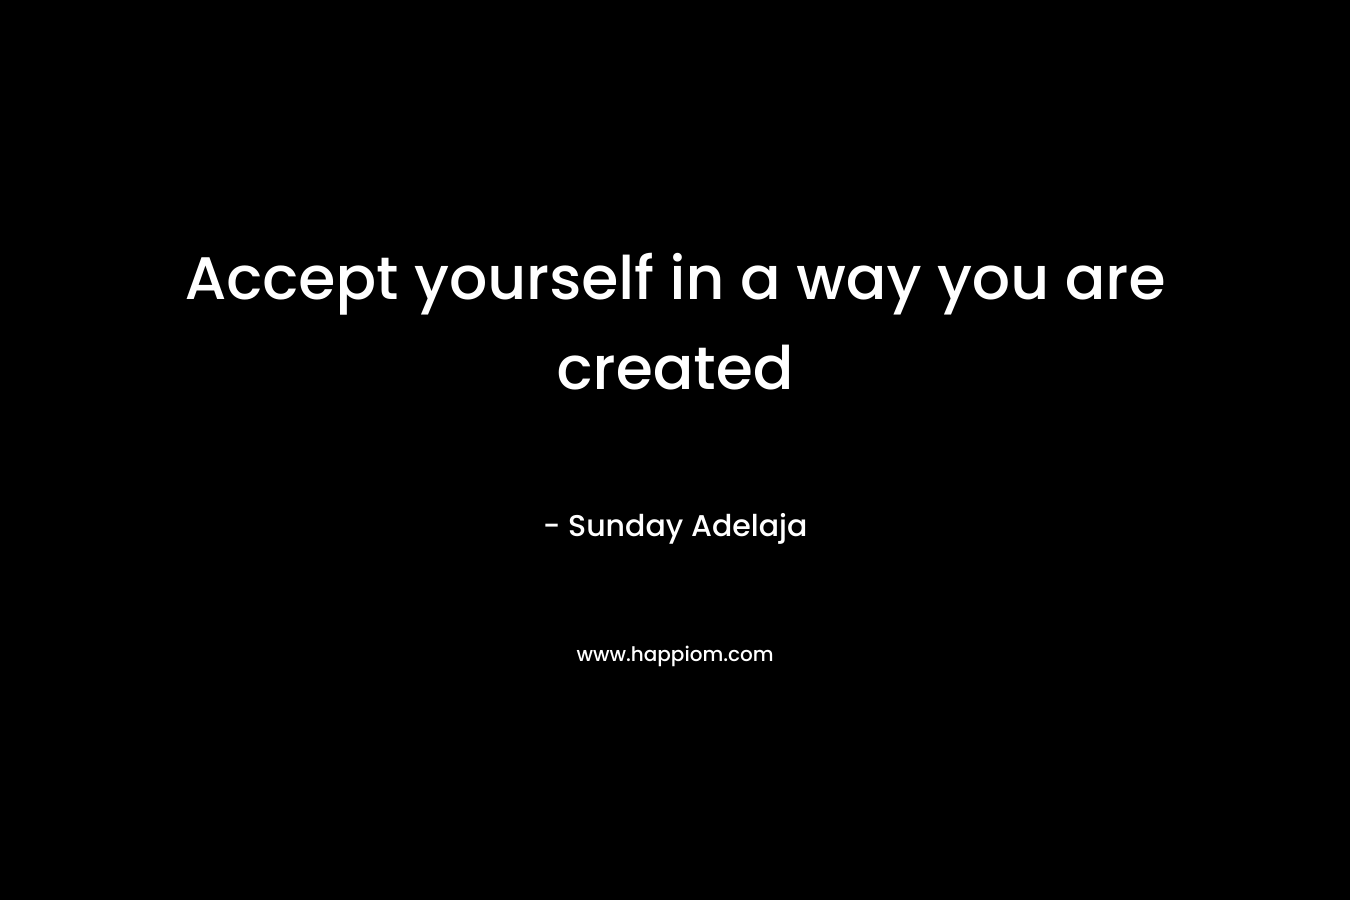 Accept yourself in a way you are created